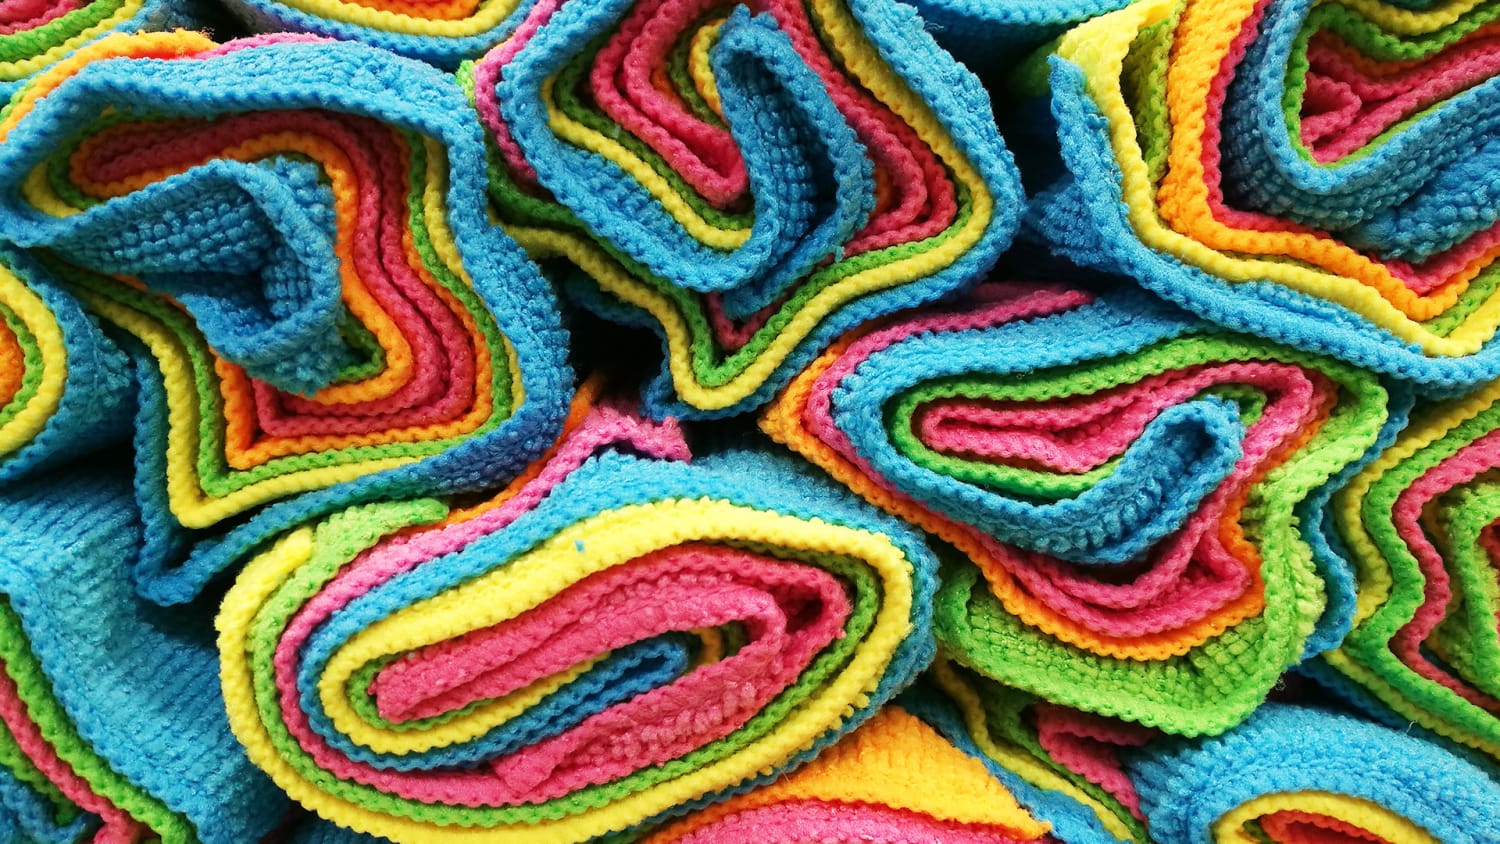 What Is Microfiber? Uses, Types, and More